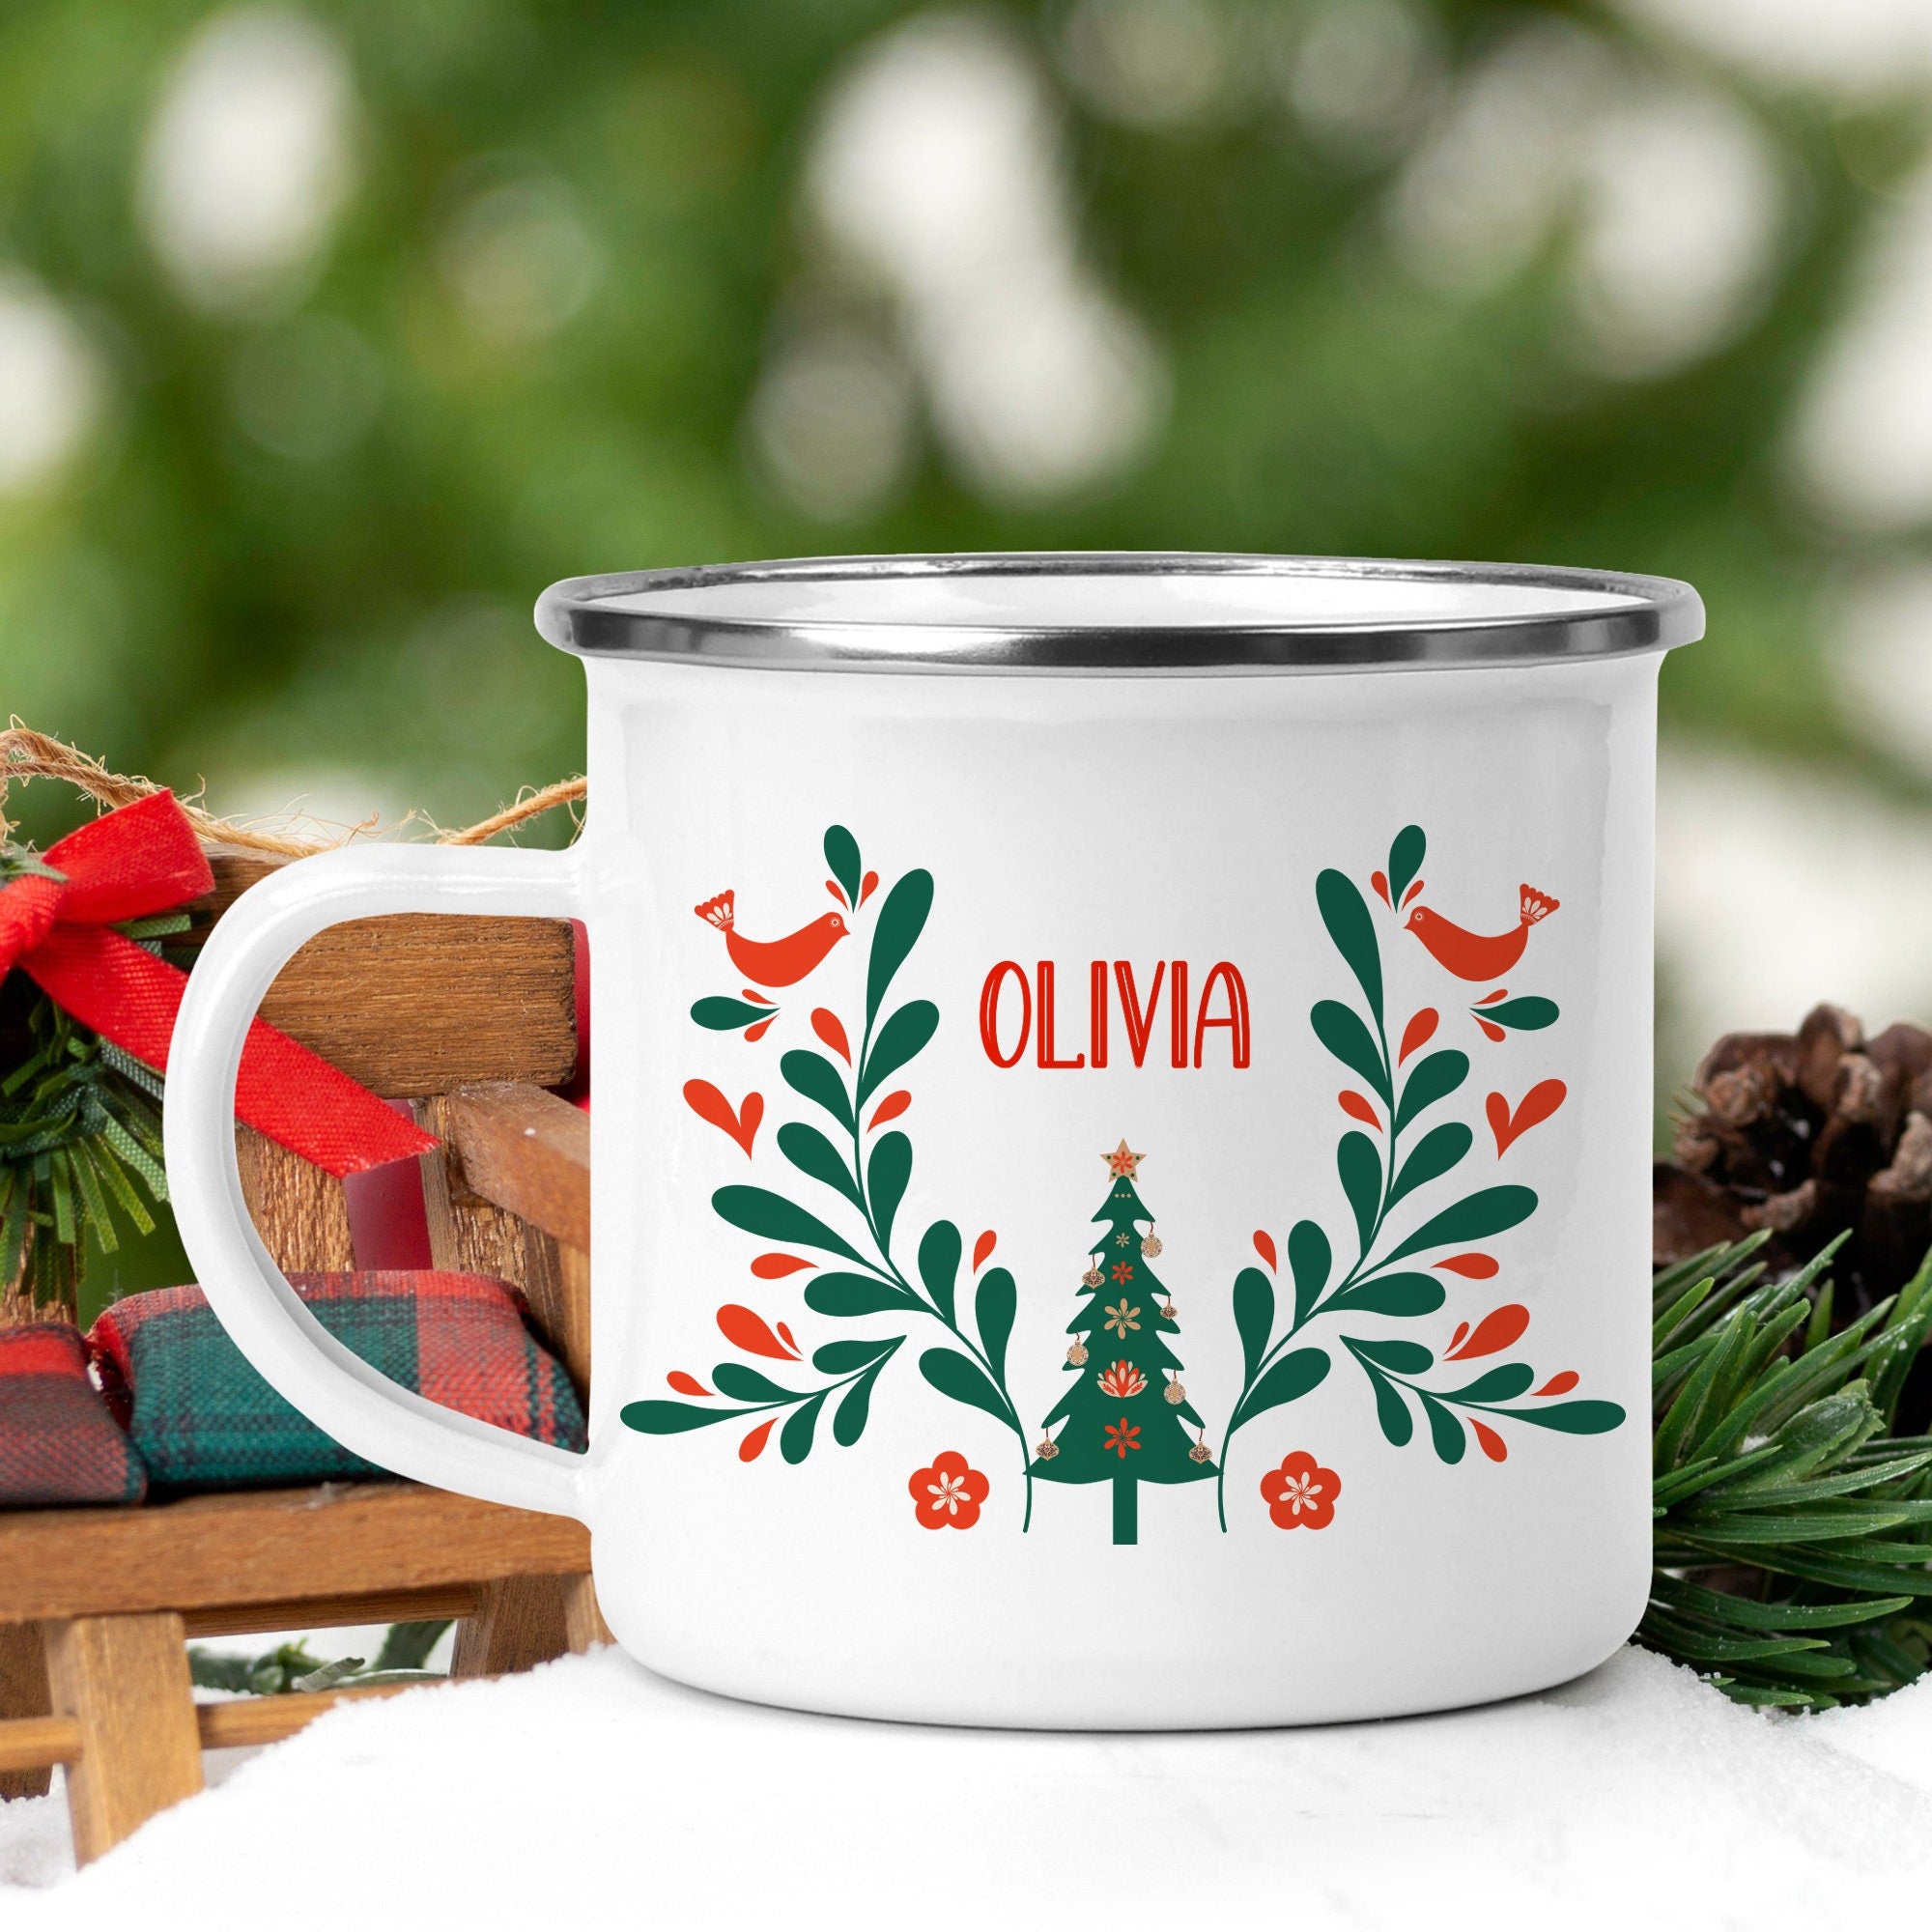 Personalised Christmas Enamel Mug With Name, Xmas Gift For Him Her Kids, Unbreakable Cup